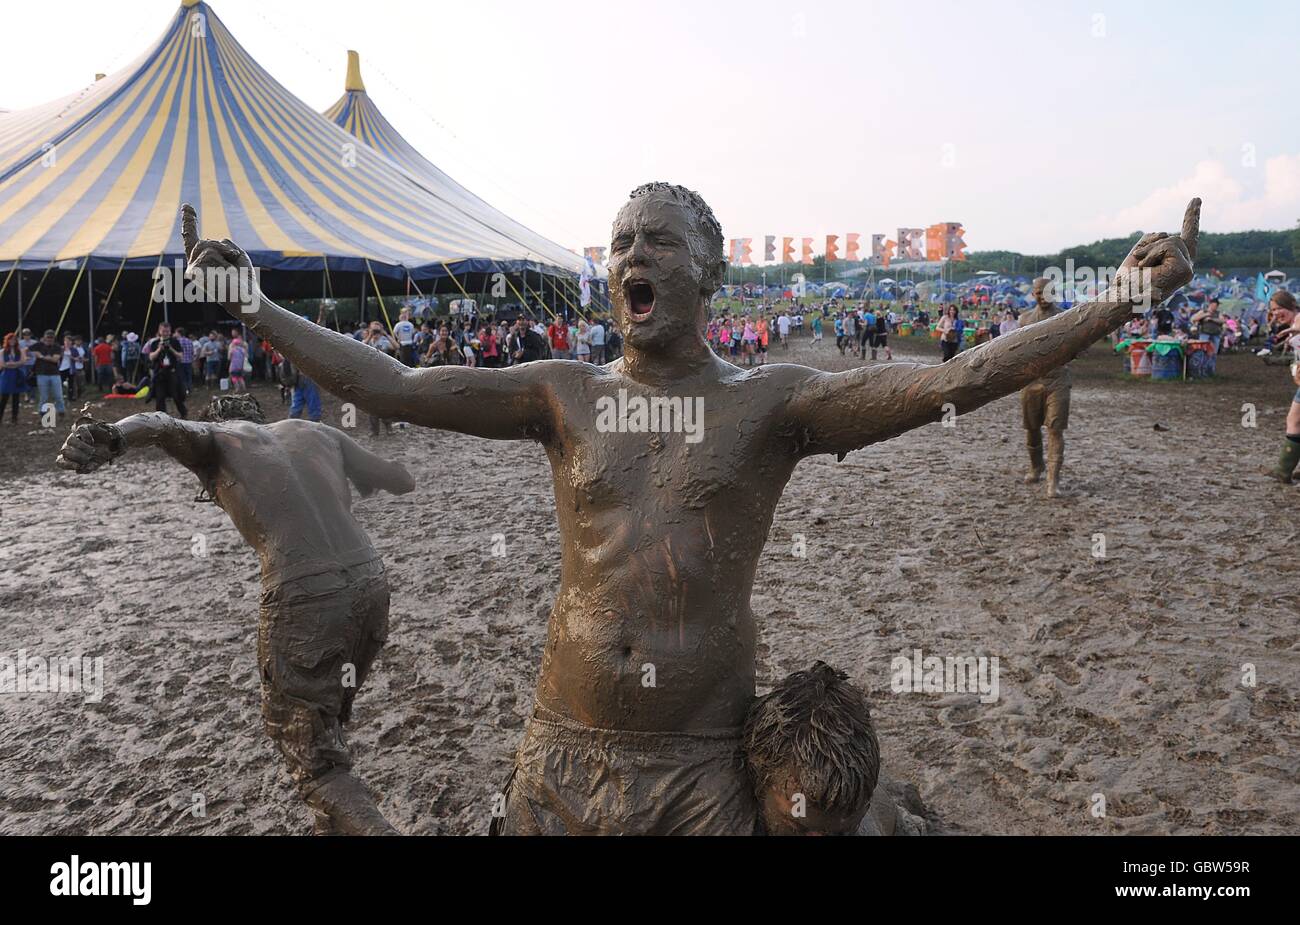 Festival goers covered in mud after a wrestling match during the 2009 Glastonbury Festival at Worthy Farm in Pilton, Somerset. Stock Photo